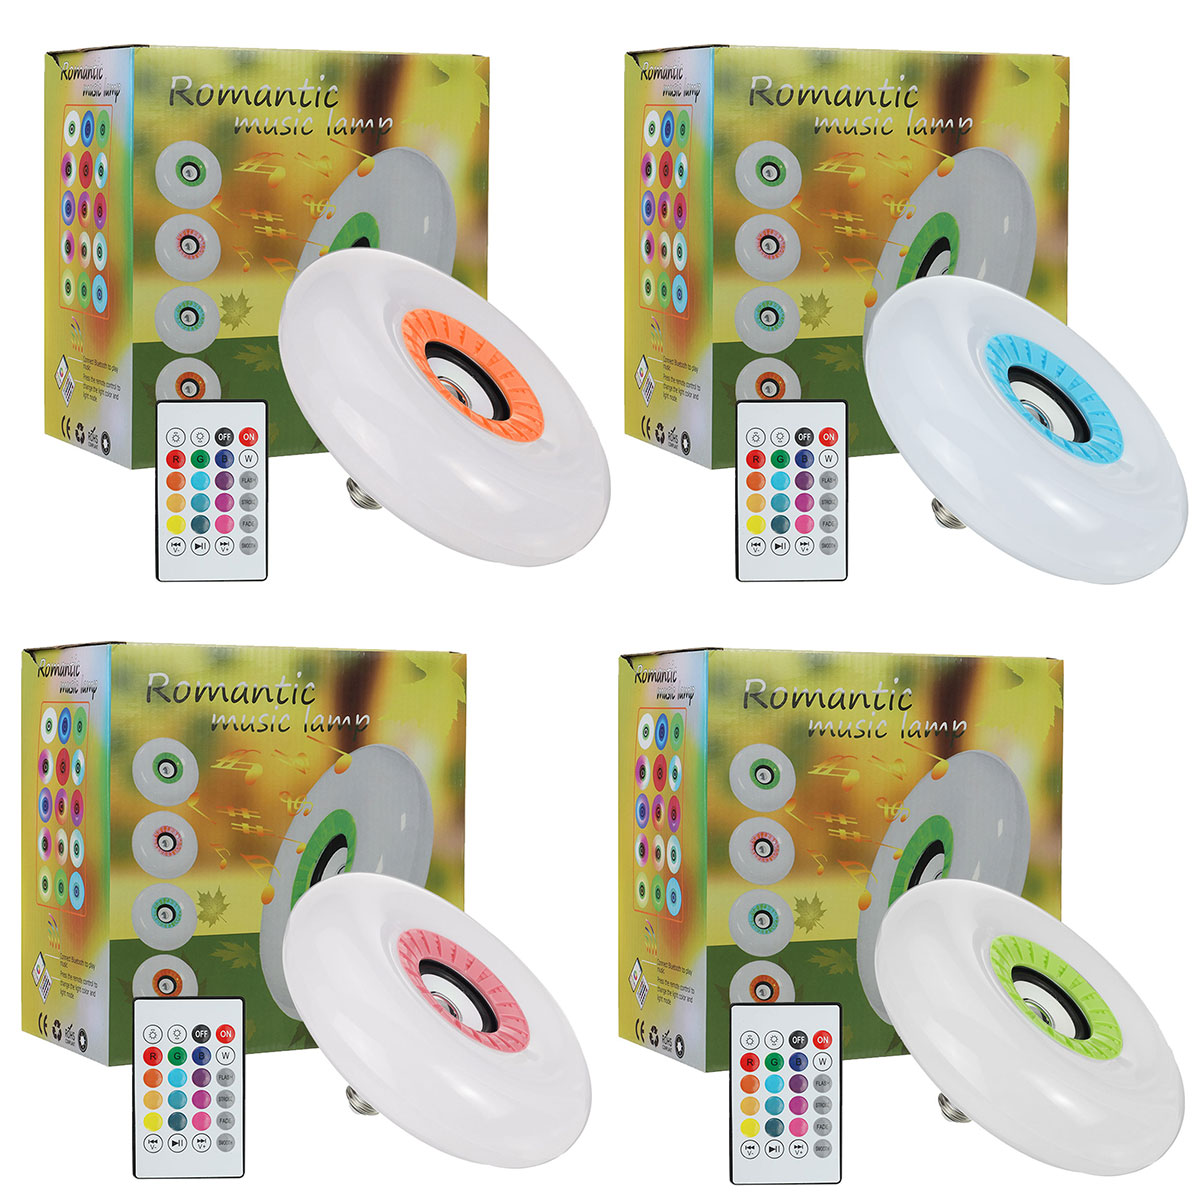 85-265V-E27-Smart-bluetooth--LED-Ceiling-Light-RGB-Music-Speeker-Dimmable-Lamp--Remote-1837972-13